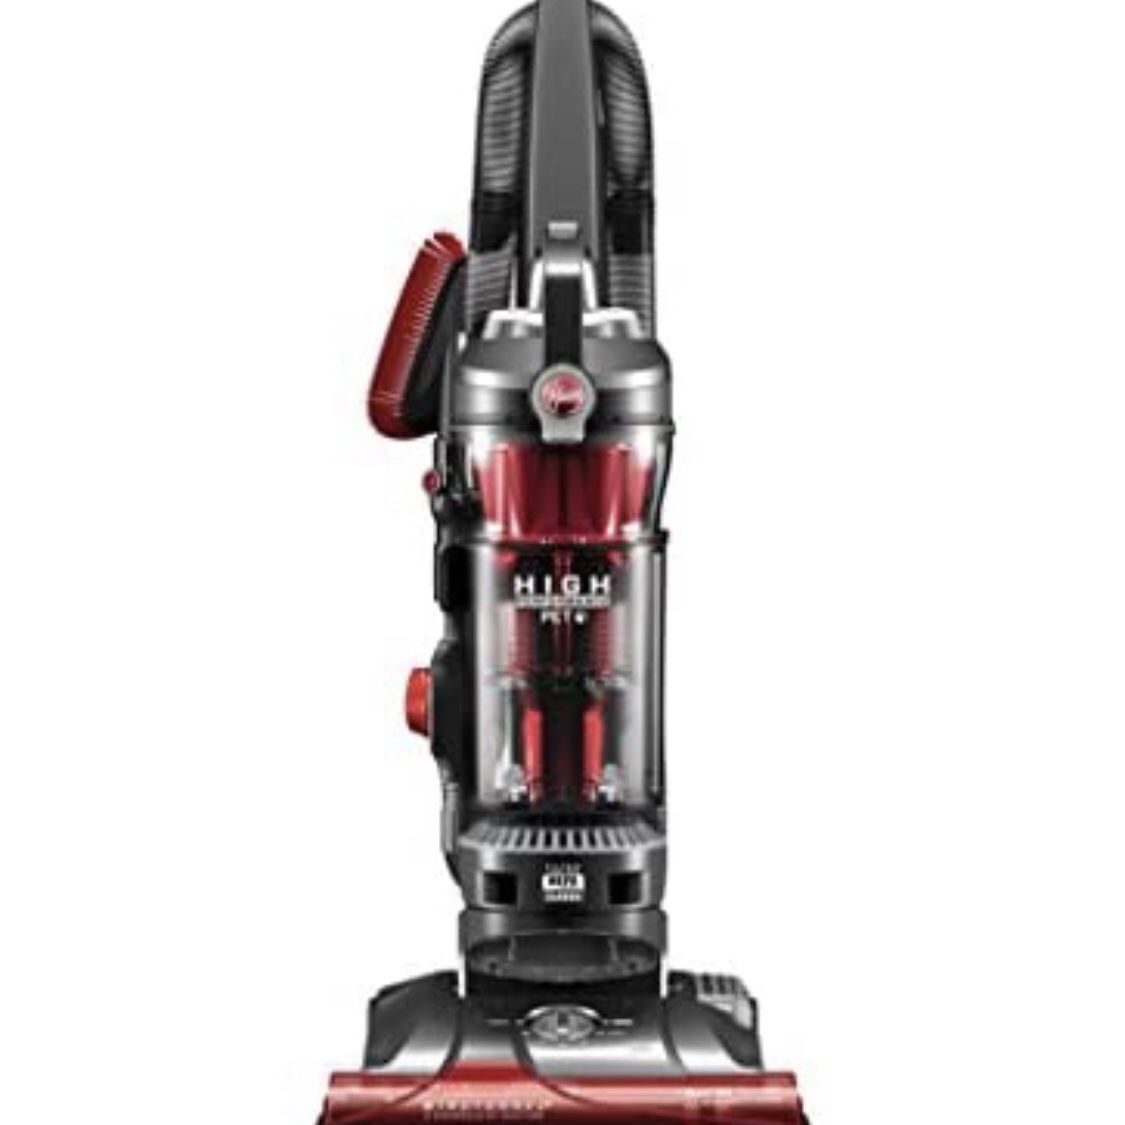 Hoover WindTunnel 3 High Performance Pet Bagless Corded Upright Vacuum Cleaner….NEVER USED!!!